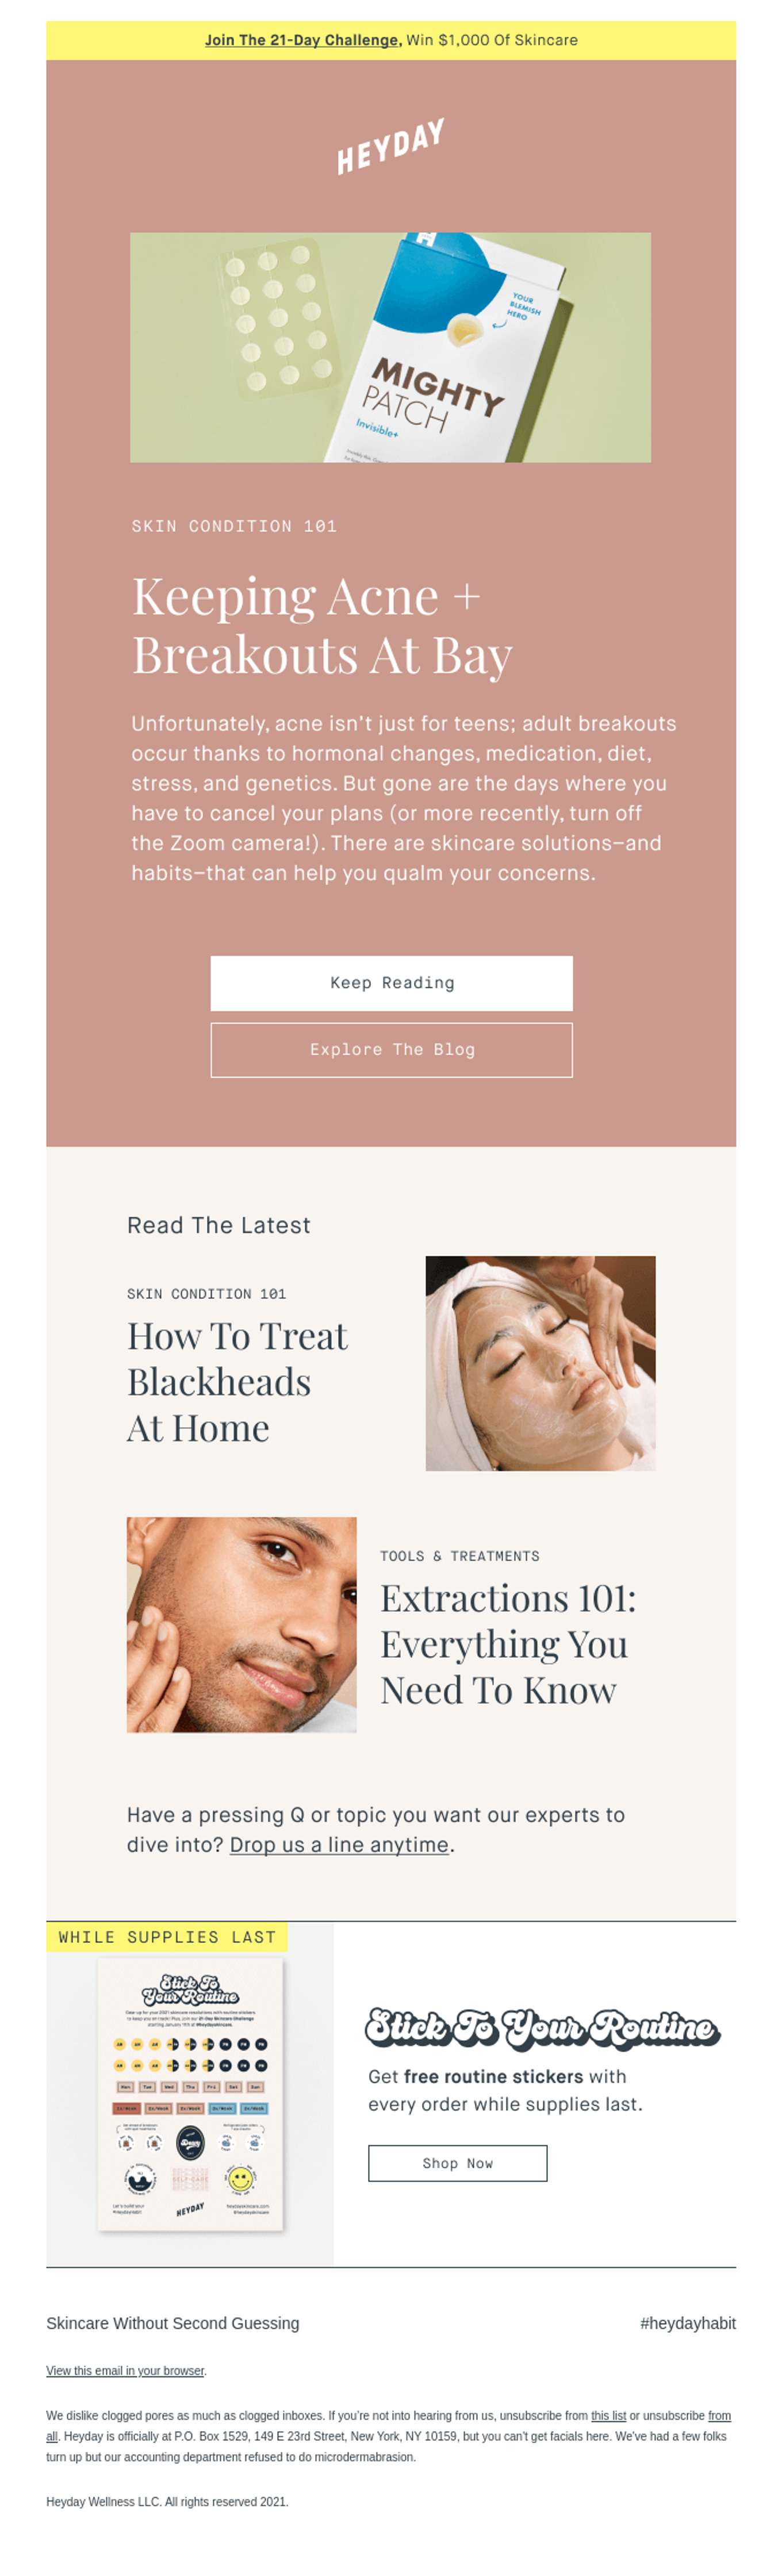 Sujet : How our estheticians *actually* prevent and treat acne